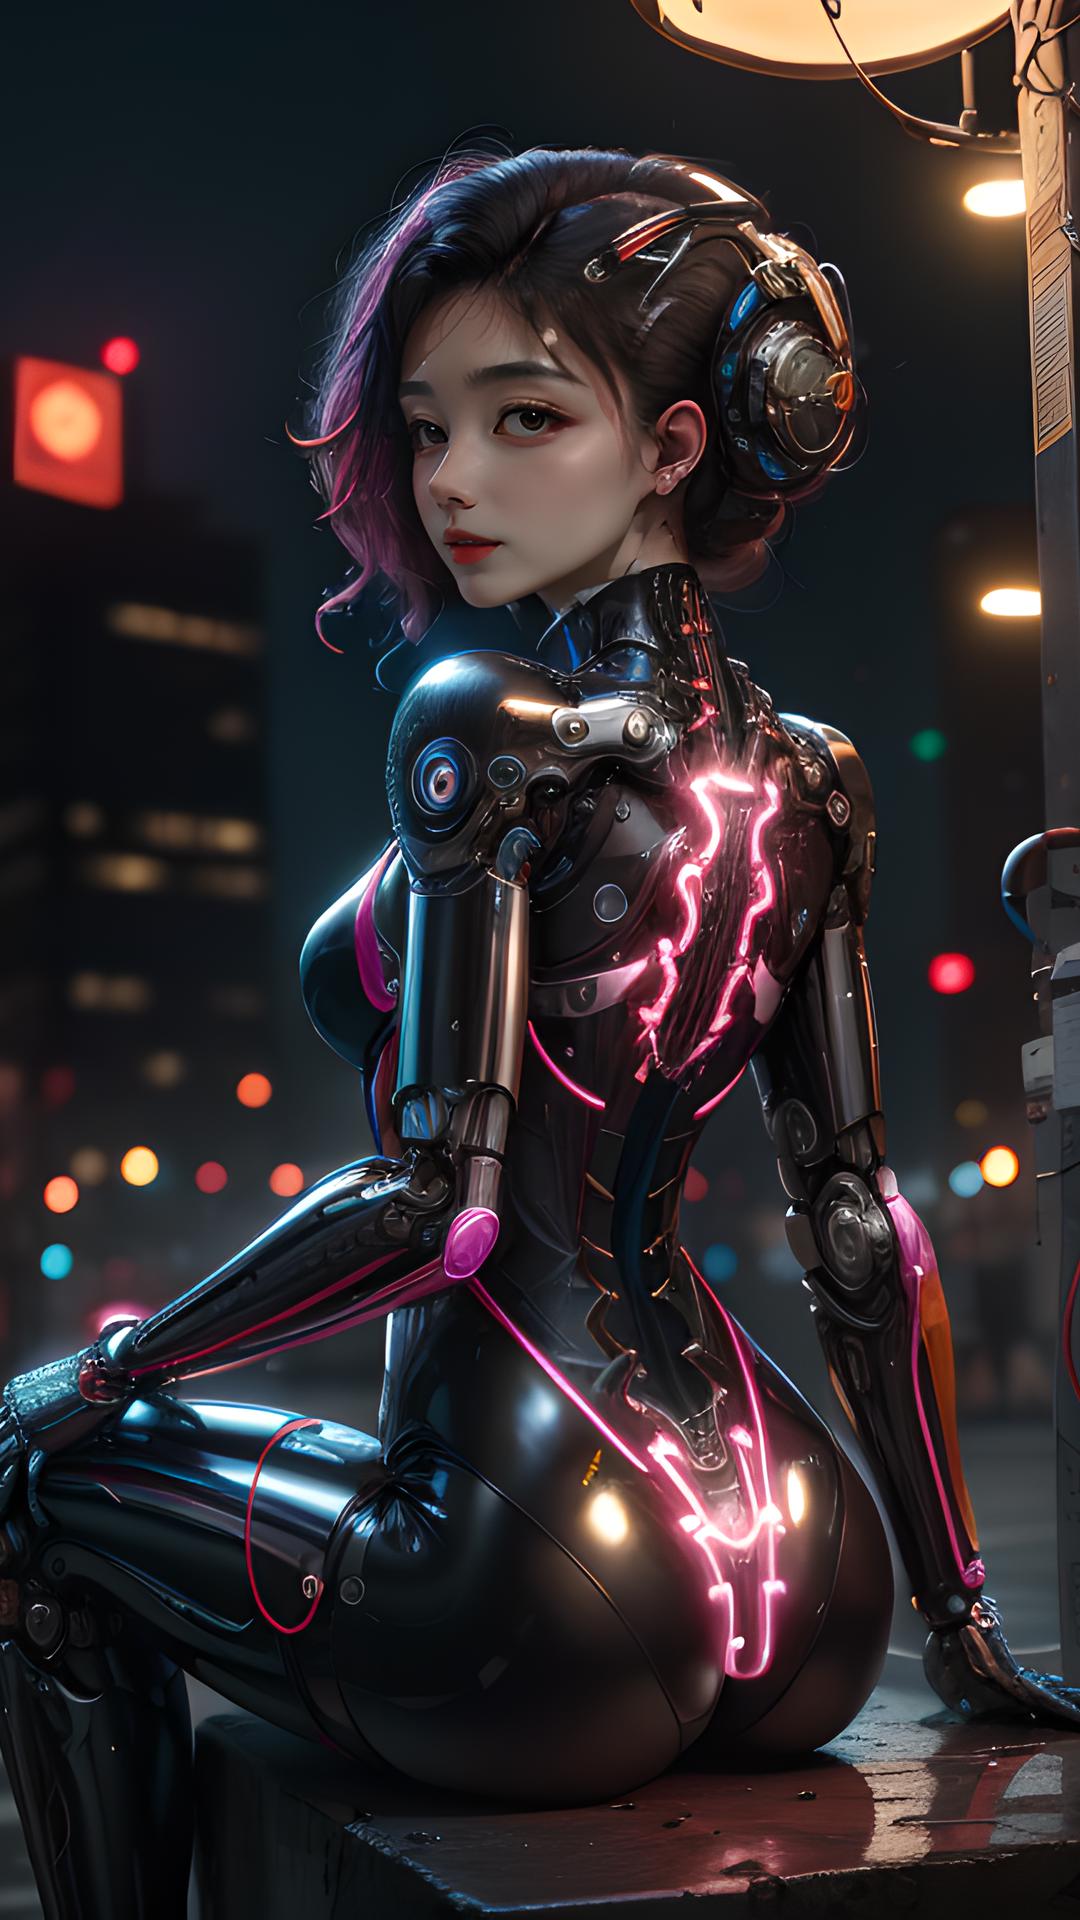 A woman in a futuristic outfit with pink and purple accents standing on a city street.